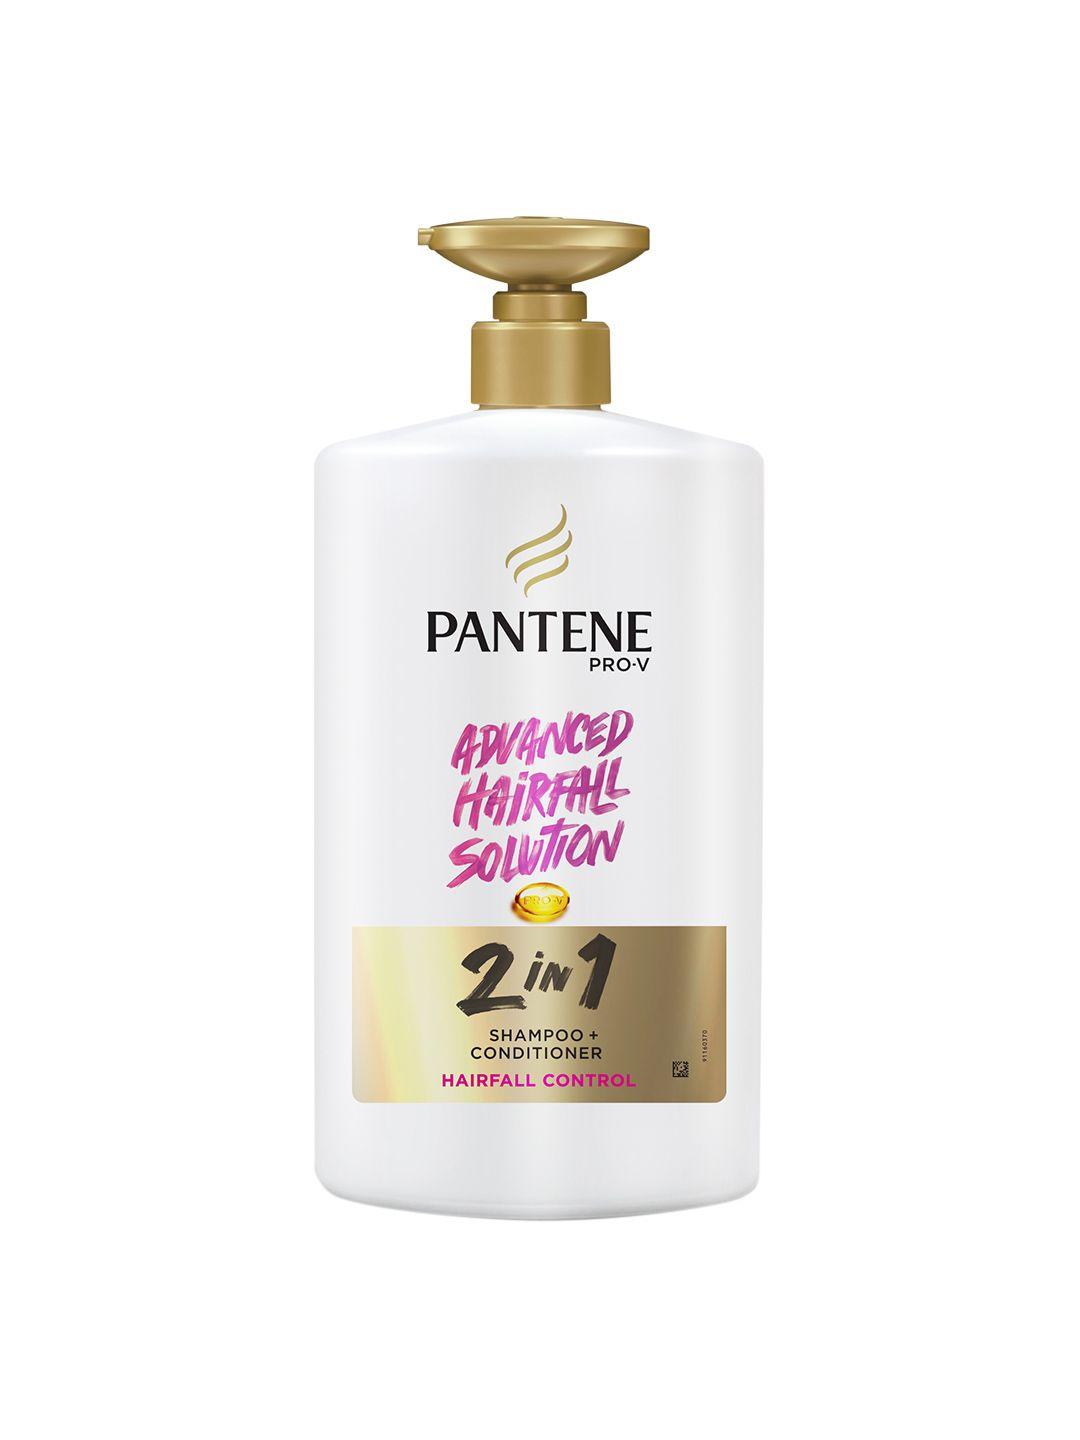 pantene pro-v advanced hairfall solution 2 in 1 hairfall control shampoo + conditioner- 1l